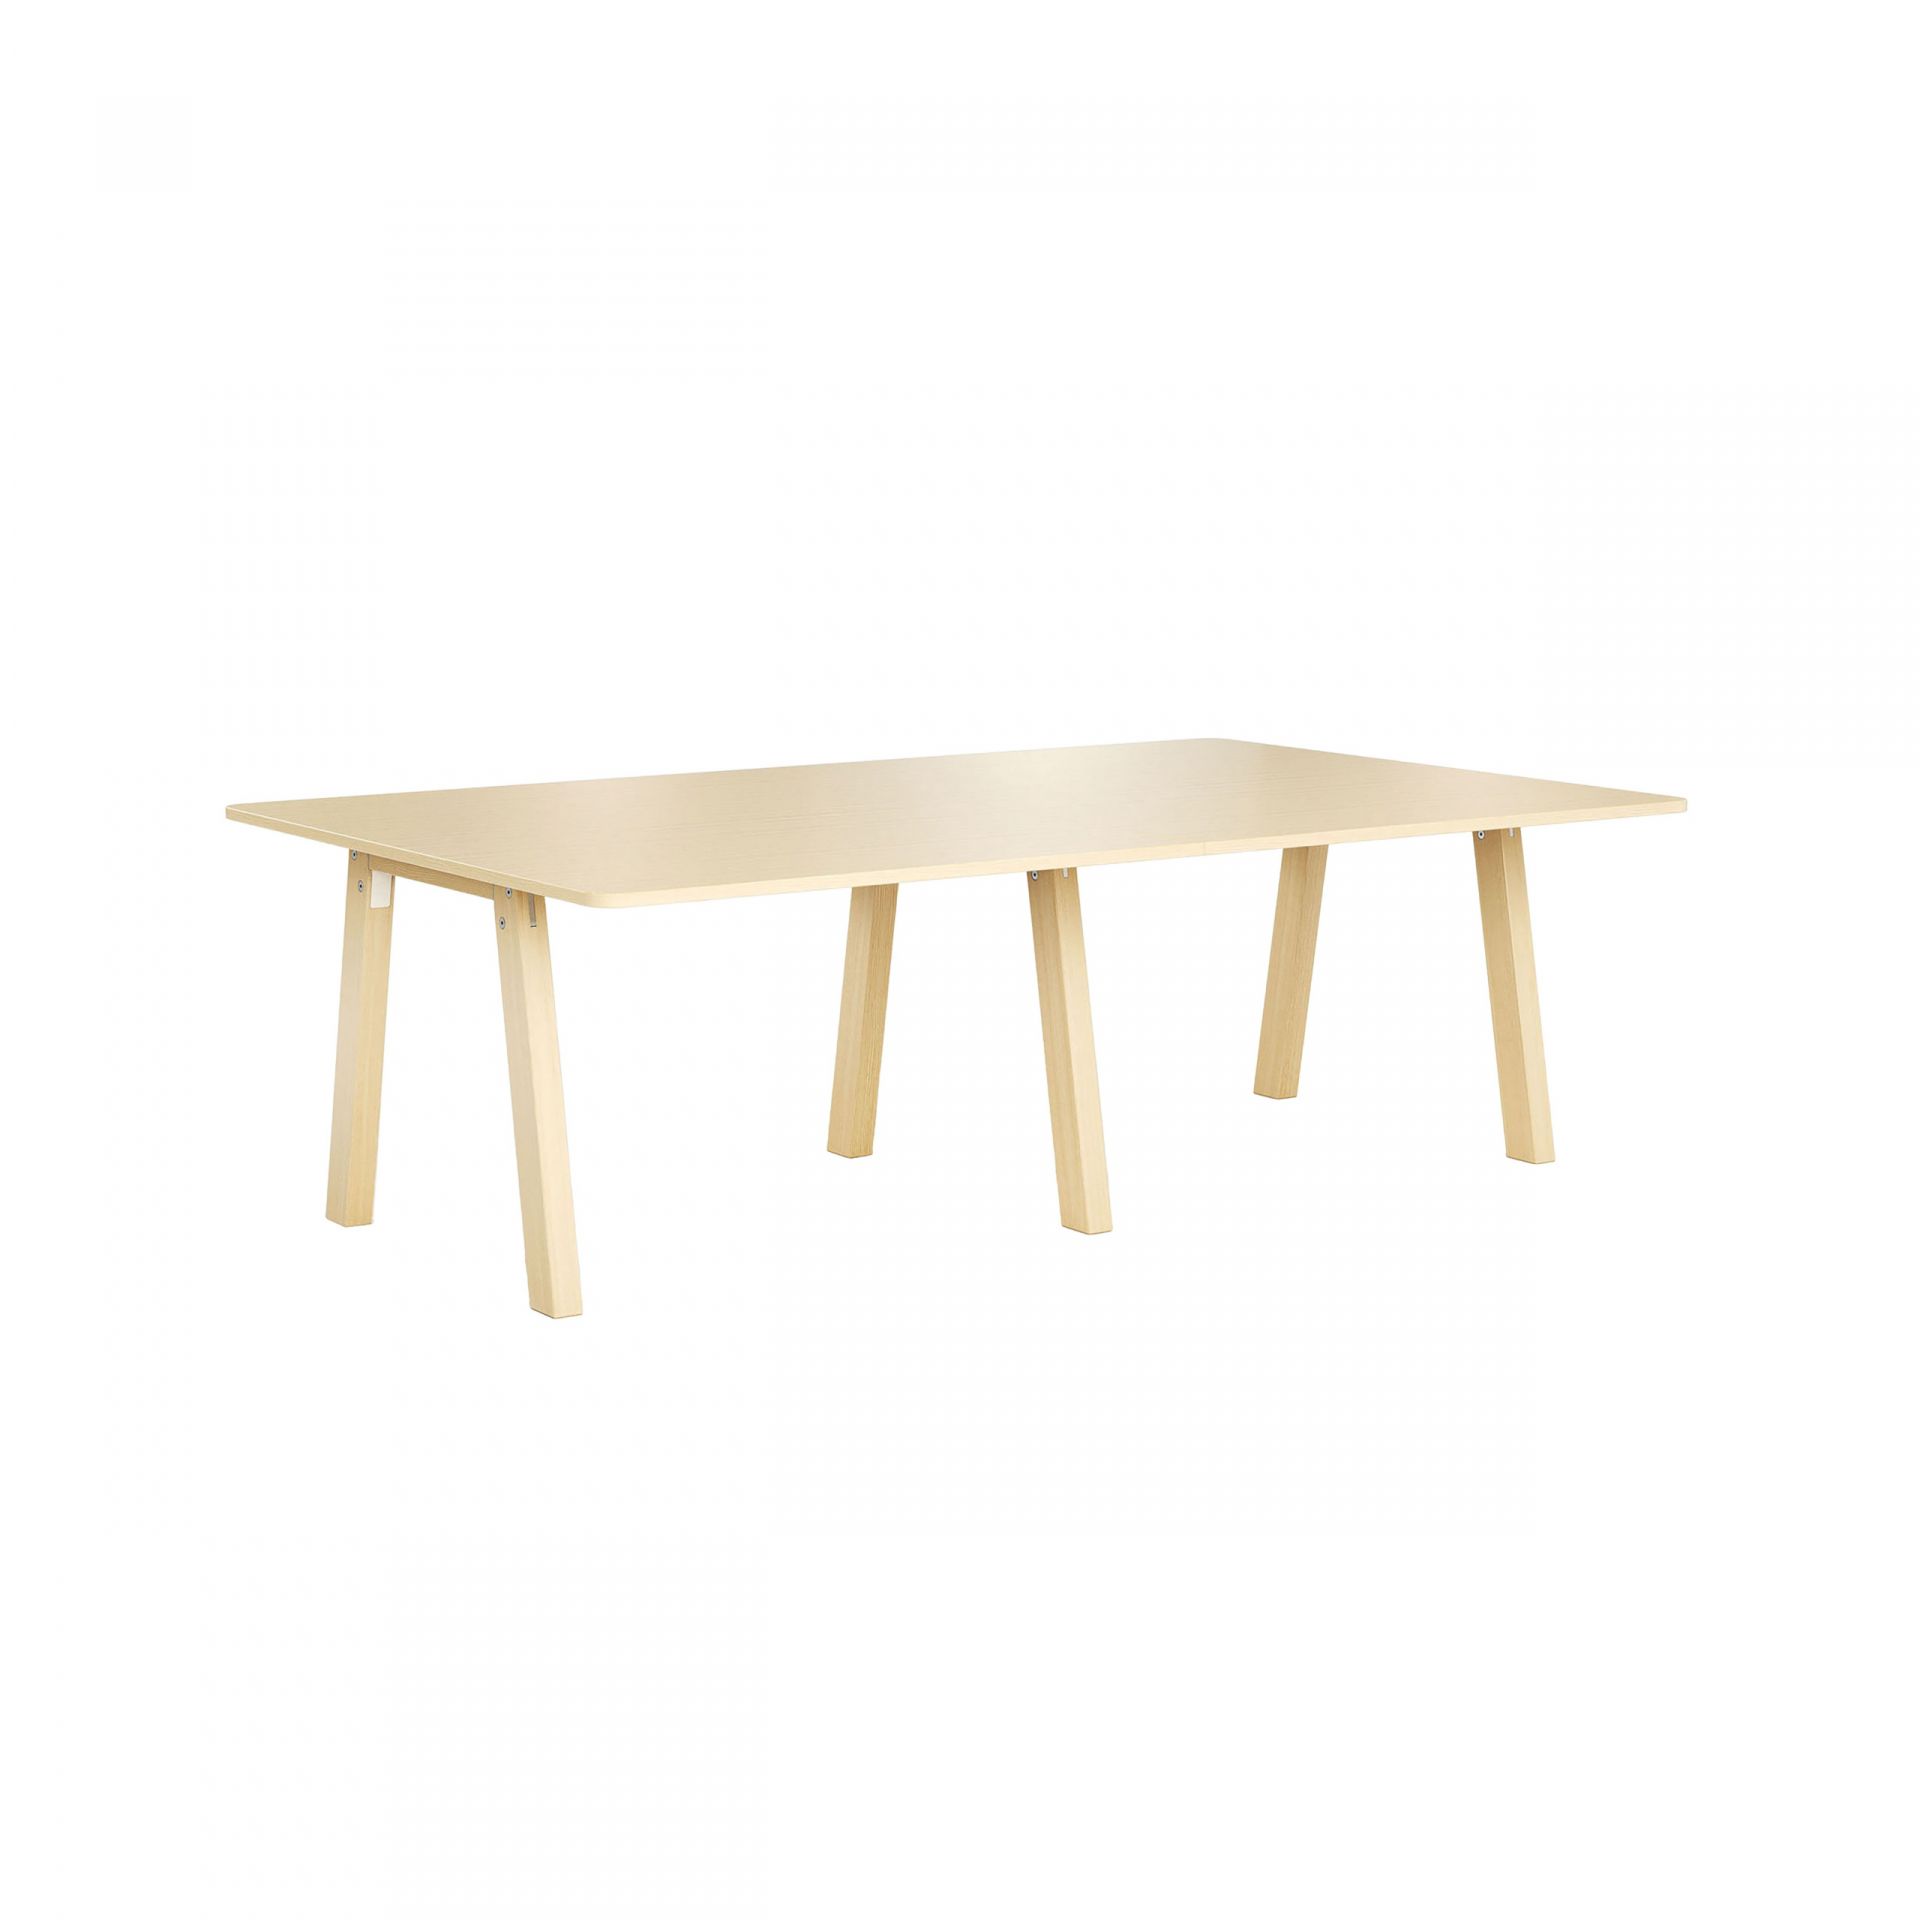 Collaborate Table with wodden legs